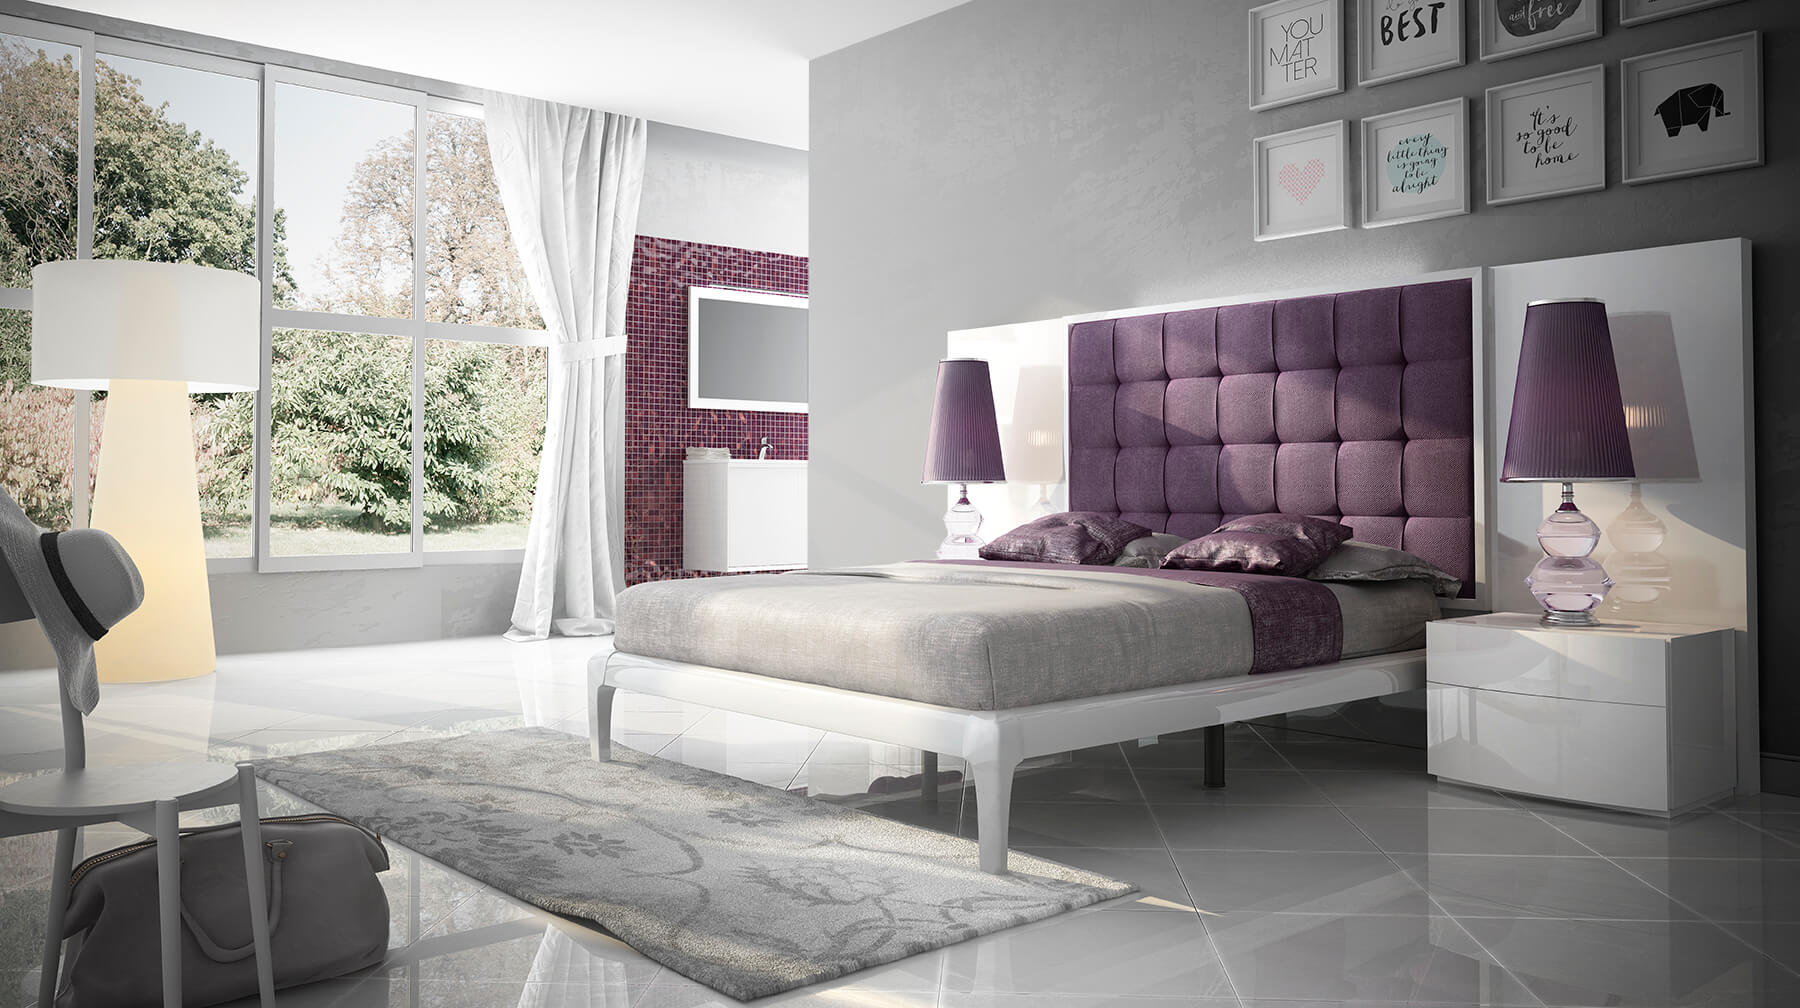 luxury-purple-headboard-bed-with-white-frame-and-two-nightstands-franco-co34